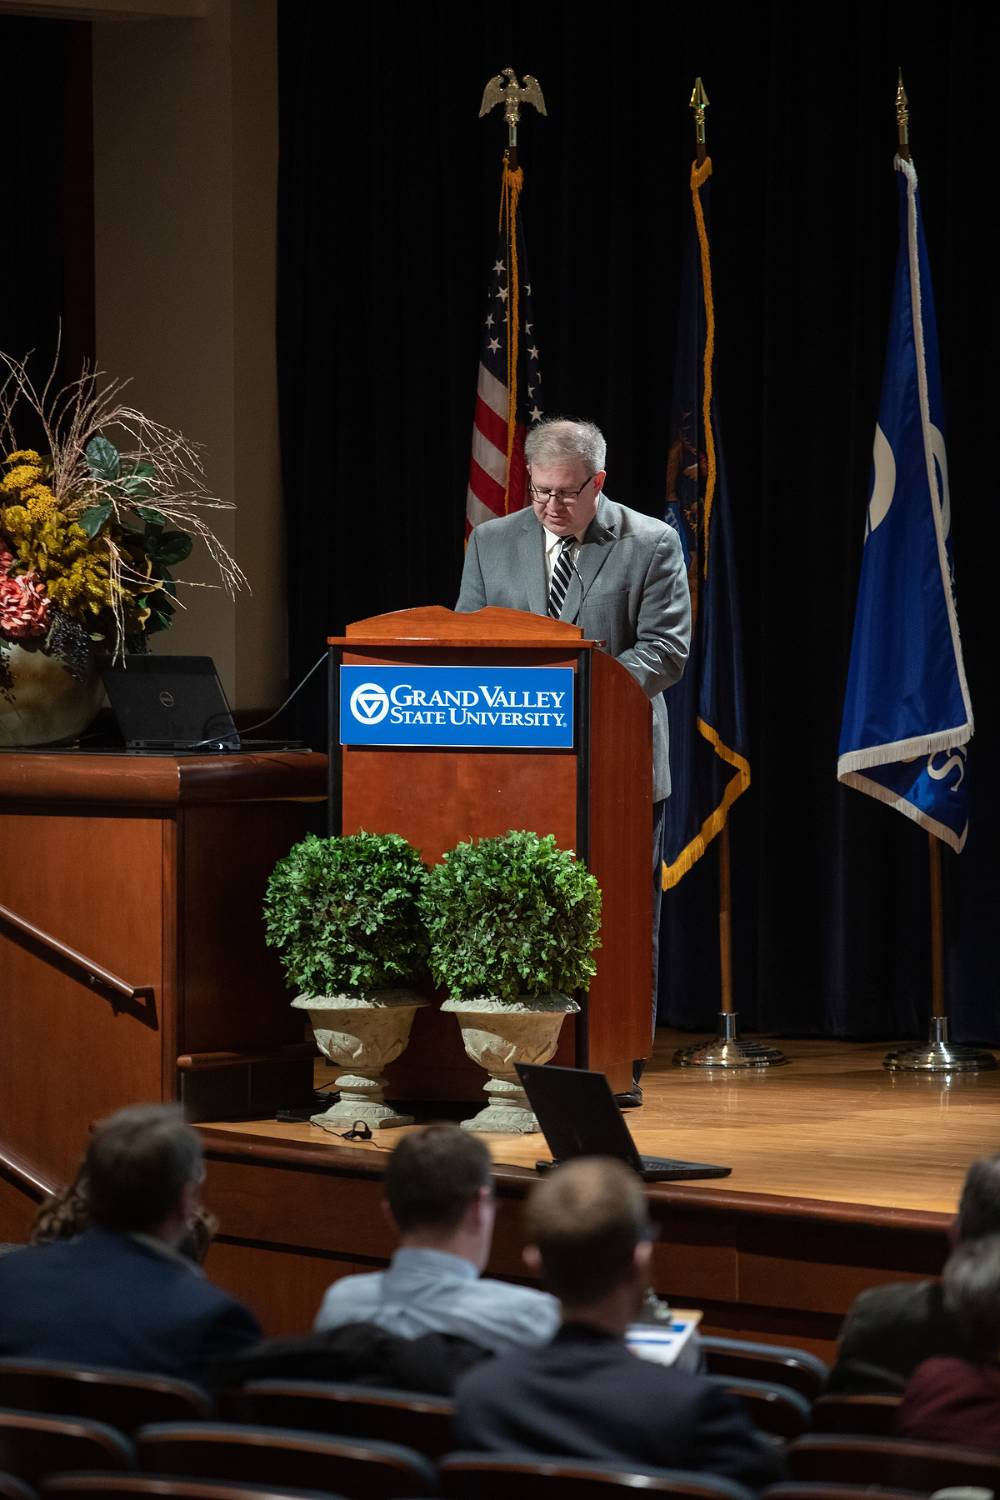 Man glancing down at a GVSU podium on stage, with audience members sitting below the stage